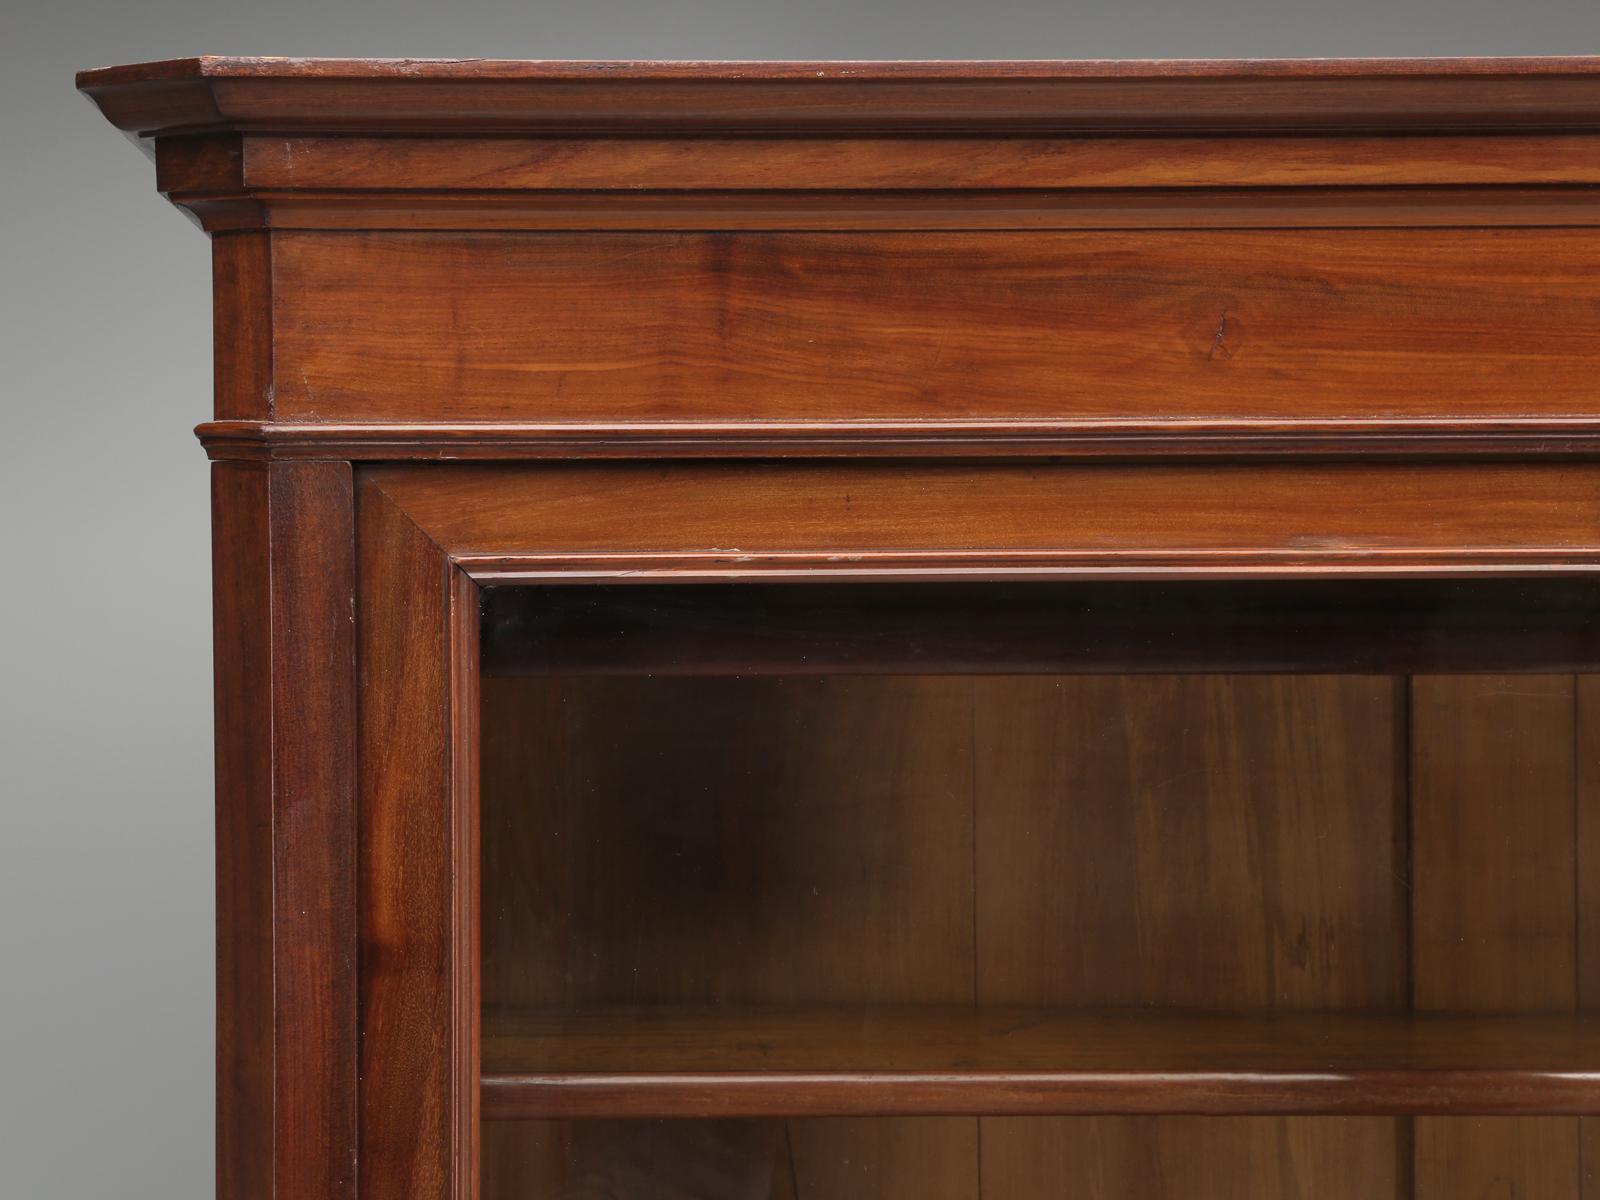 Hand-Crafted Antique French Mahogany Bookcase, Original and Beautiful Unrestored Condition